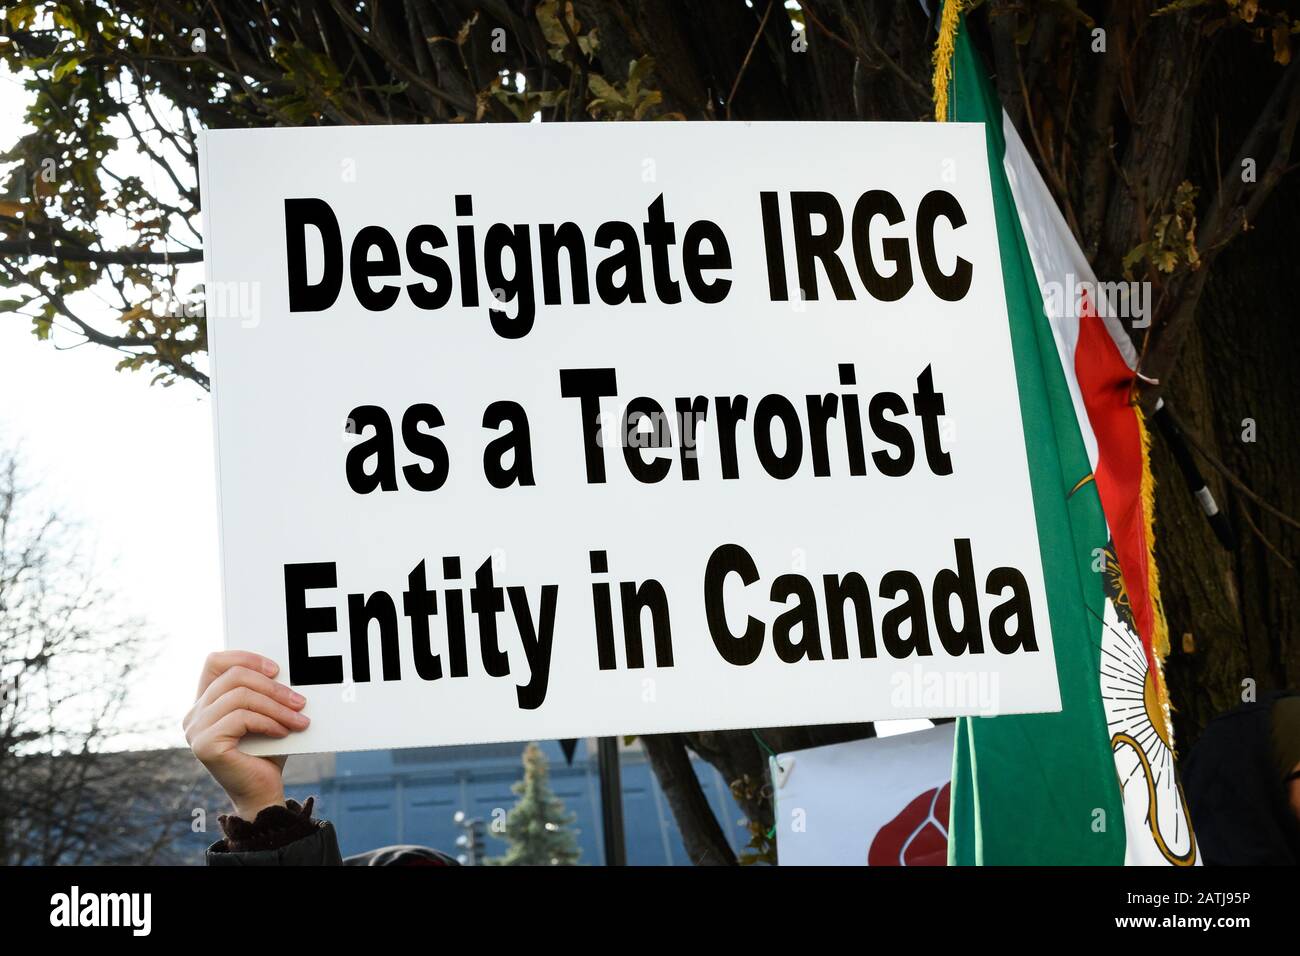 A demonstrator in solidarity with the protesters in Iran calls for Iran's Islamic Revolutionary Guard Corps to be listed as a terrorist entity. Stock Photo